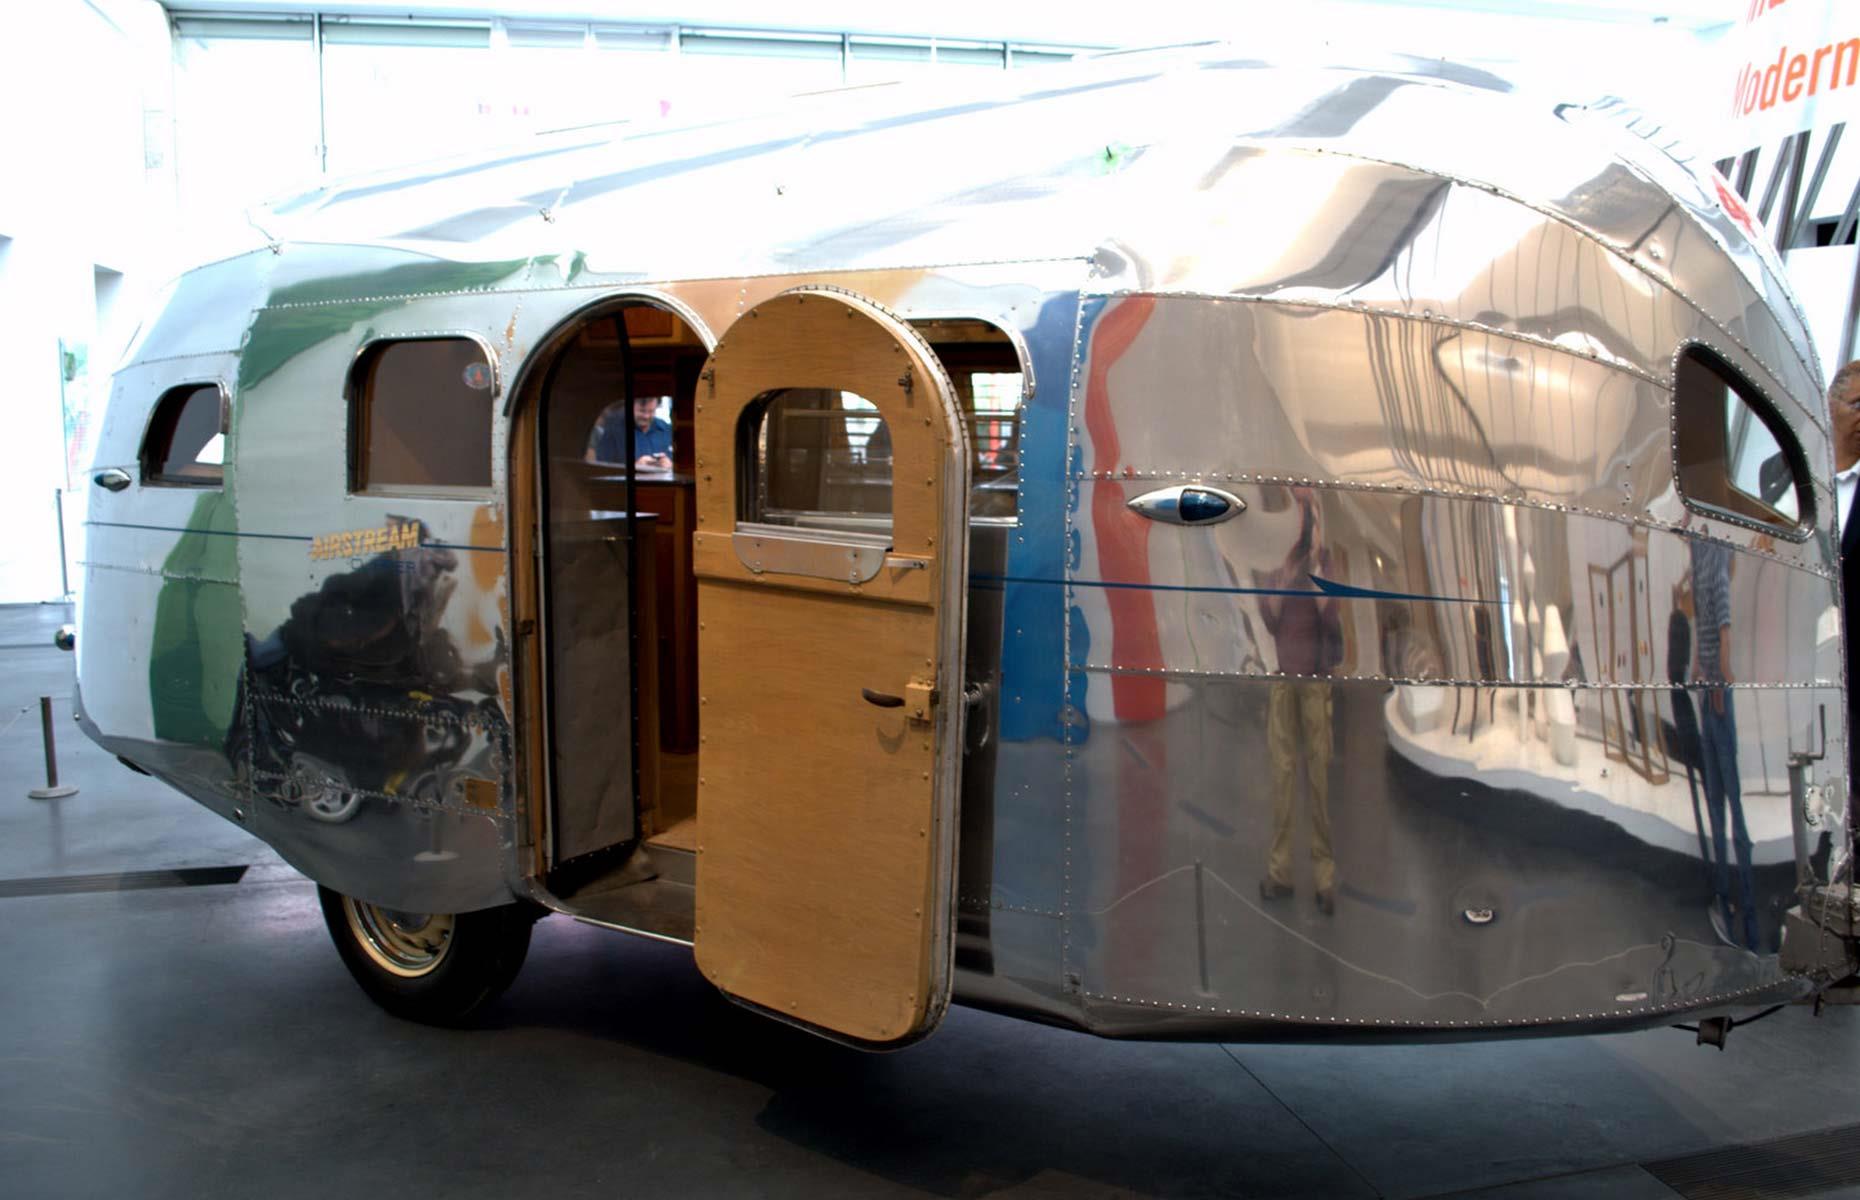 <p>During the early 30s, William Hawley Bowlus, an engineer who had worked on Charles Lindbergh's famous Spirit of St Louis aeroplane, created the Road Chief, an aerodynamic Streamline Moderne-style trailer in gleaming aluminium. But Bowlus' aircraft-inspired RVs failed to sell.</p>  <p>In 1936, Byam stepped in, buying up Bowlus' inventory. Byam reconfigured the Road Chief, creating the iconic Airstream Clipper, pictured here, and put his marketing and advertising skills to good use.</p>